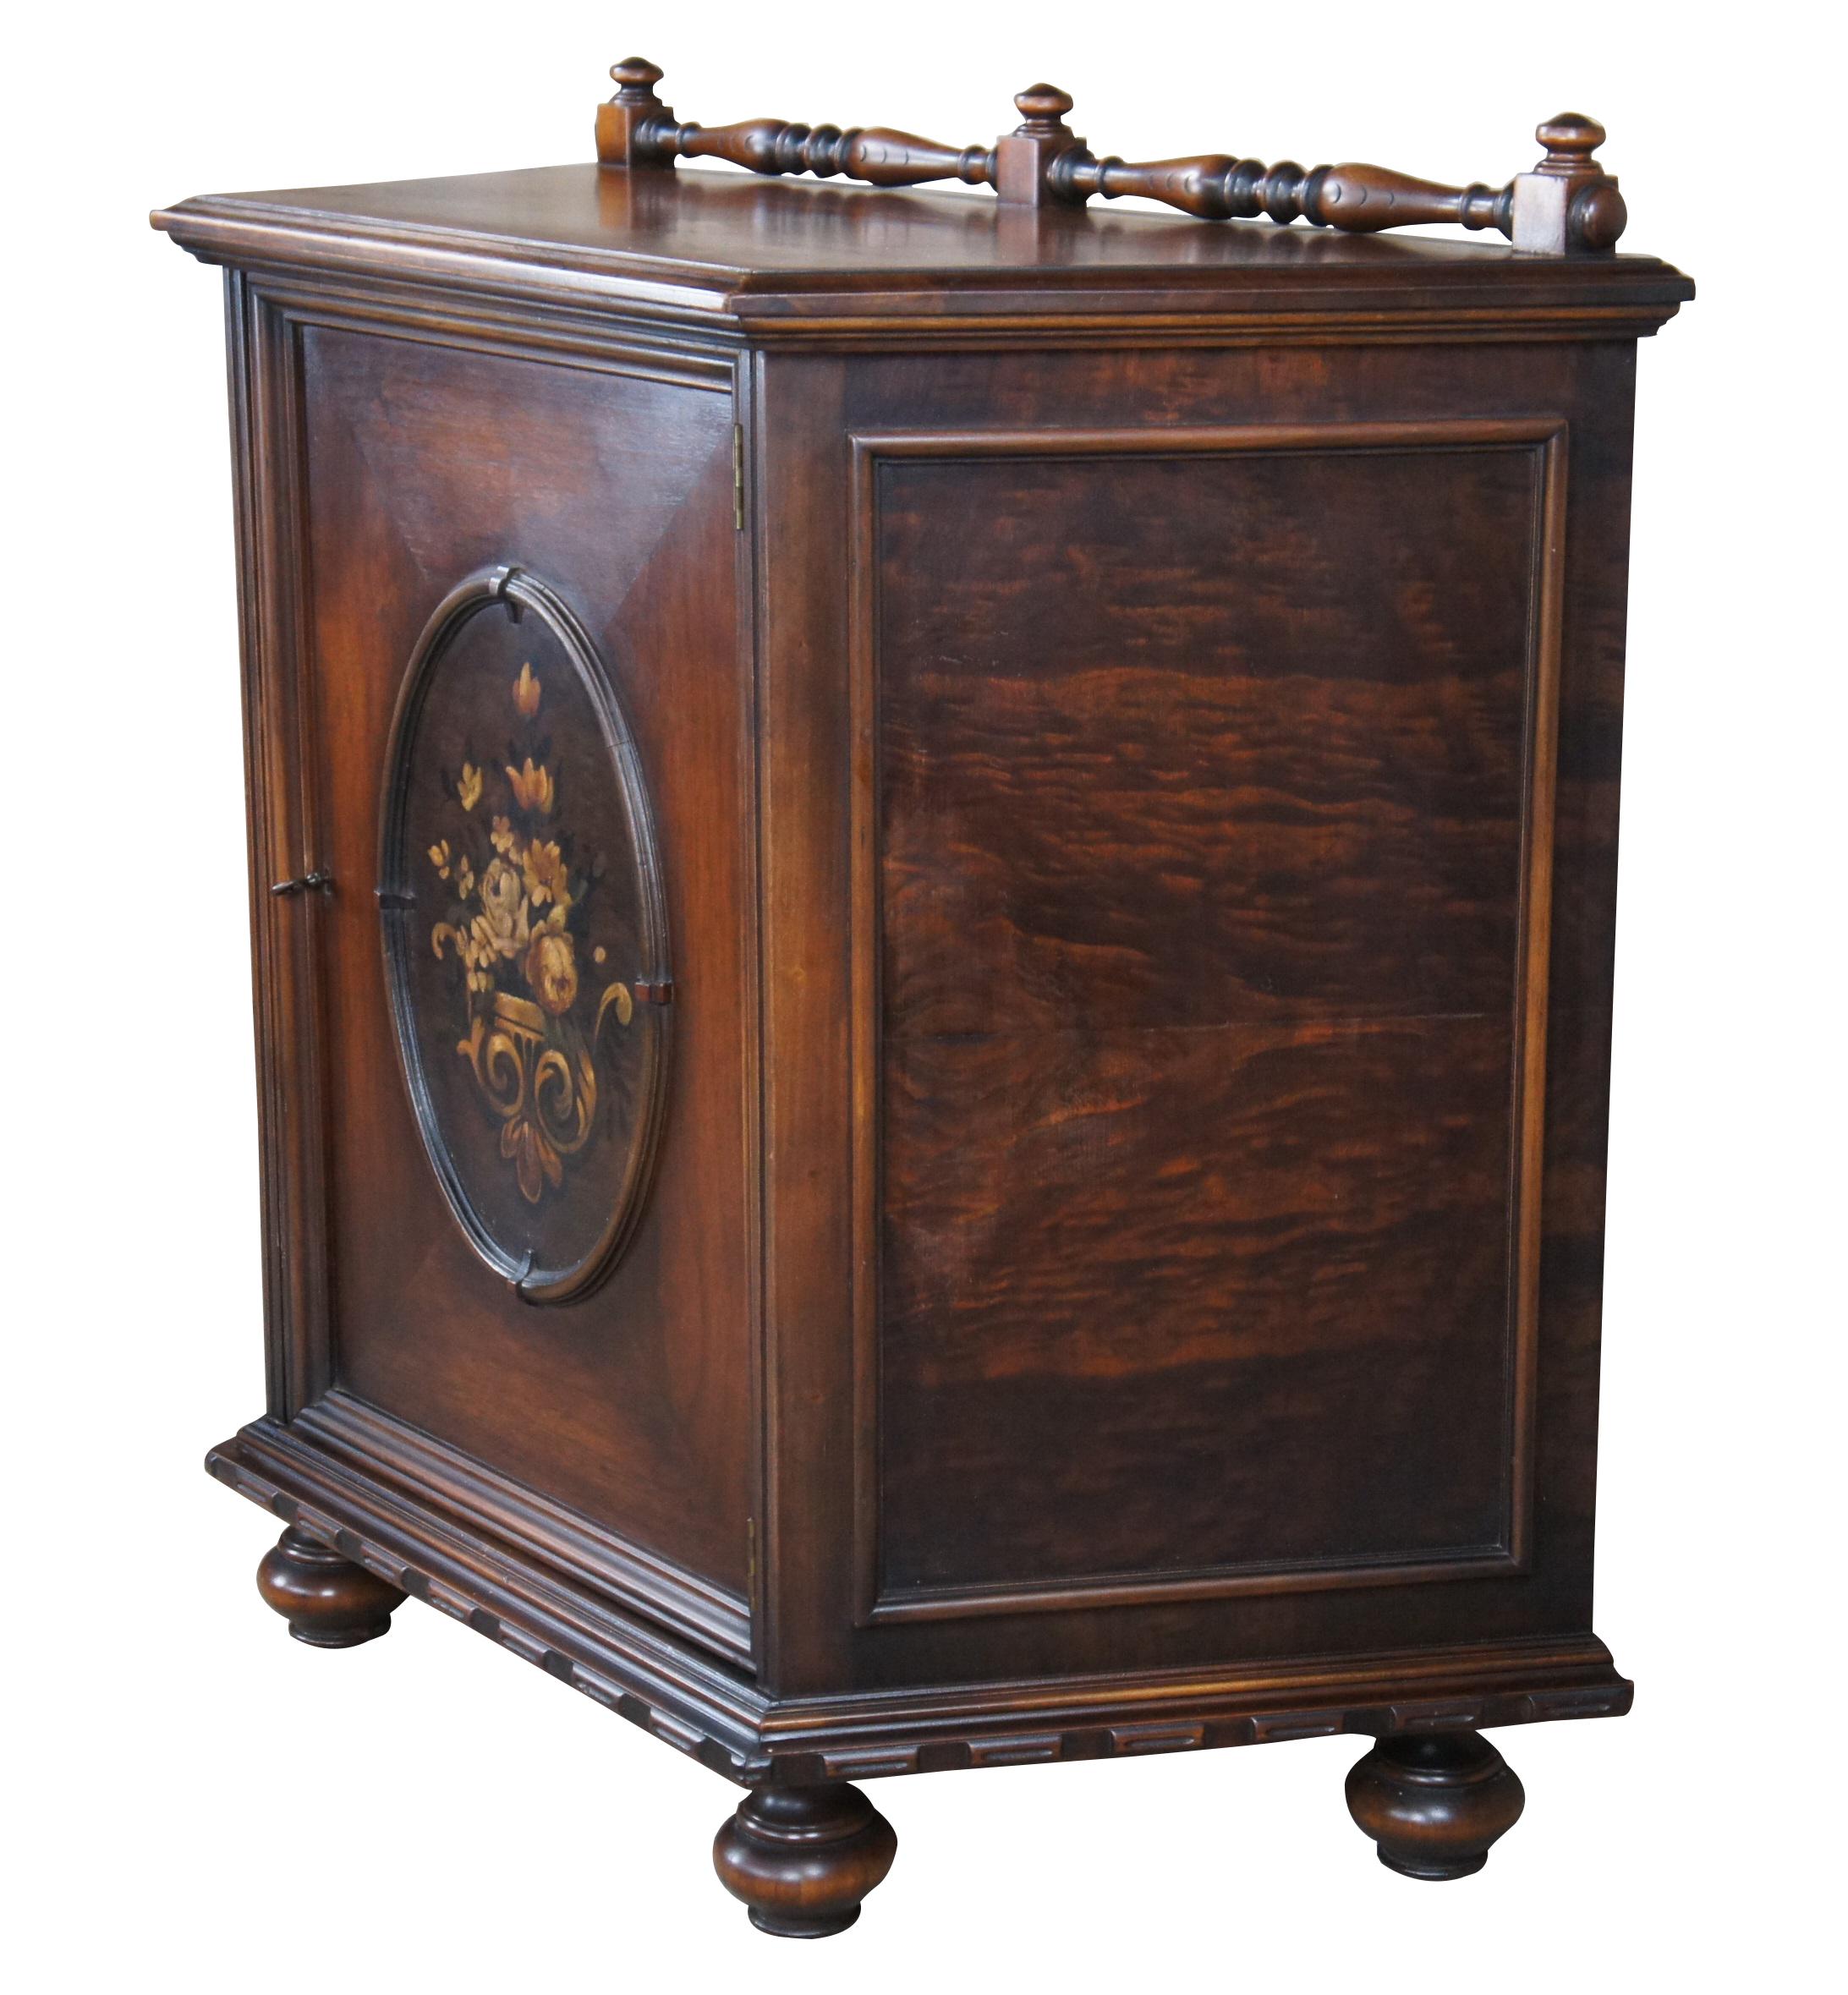 Antique Life Time Furniture buffet, sideboard or cabinet.  Made of walnut featuring trapezoid form with Jacobean and Spanish styling.  Features Upper turned gallery, painted floral bouquet, turned bun feet and red painted interior with two shelves.